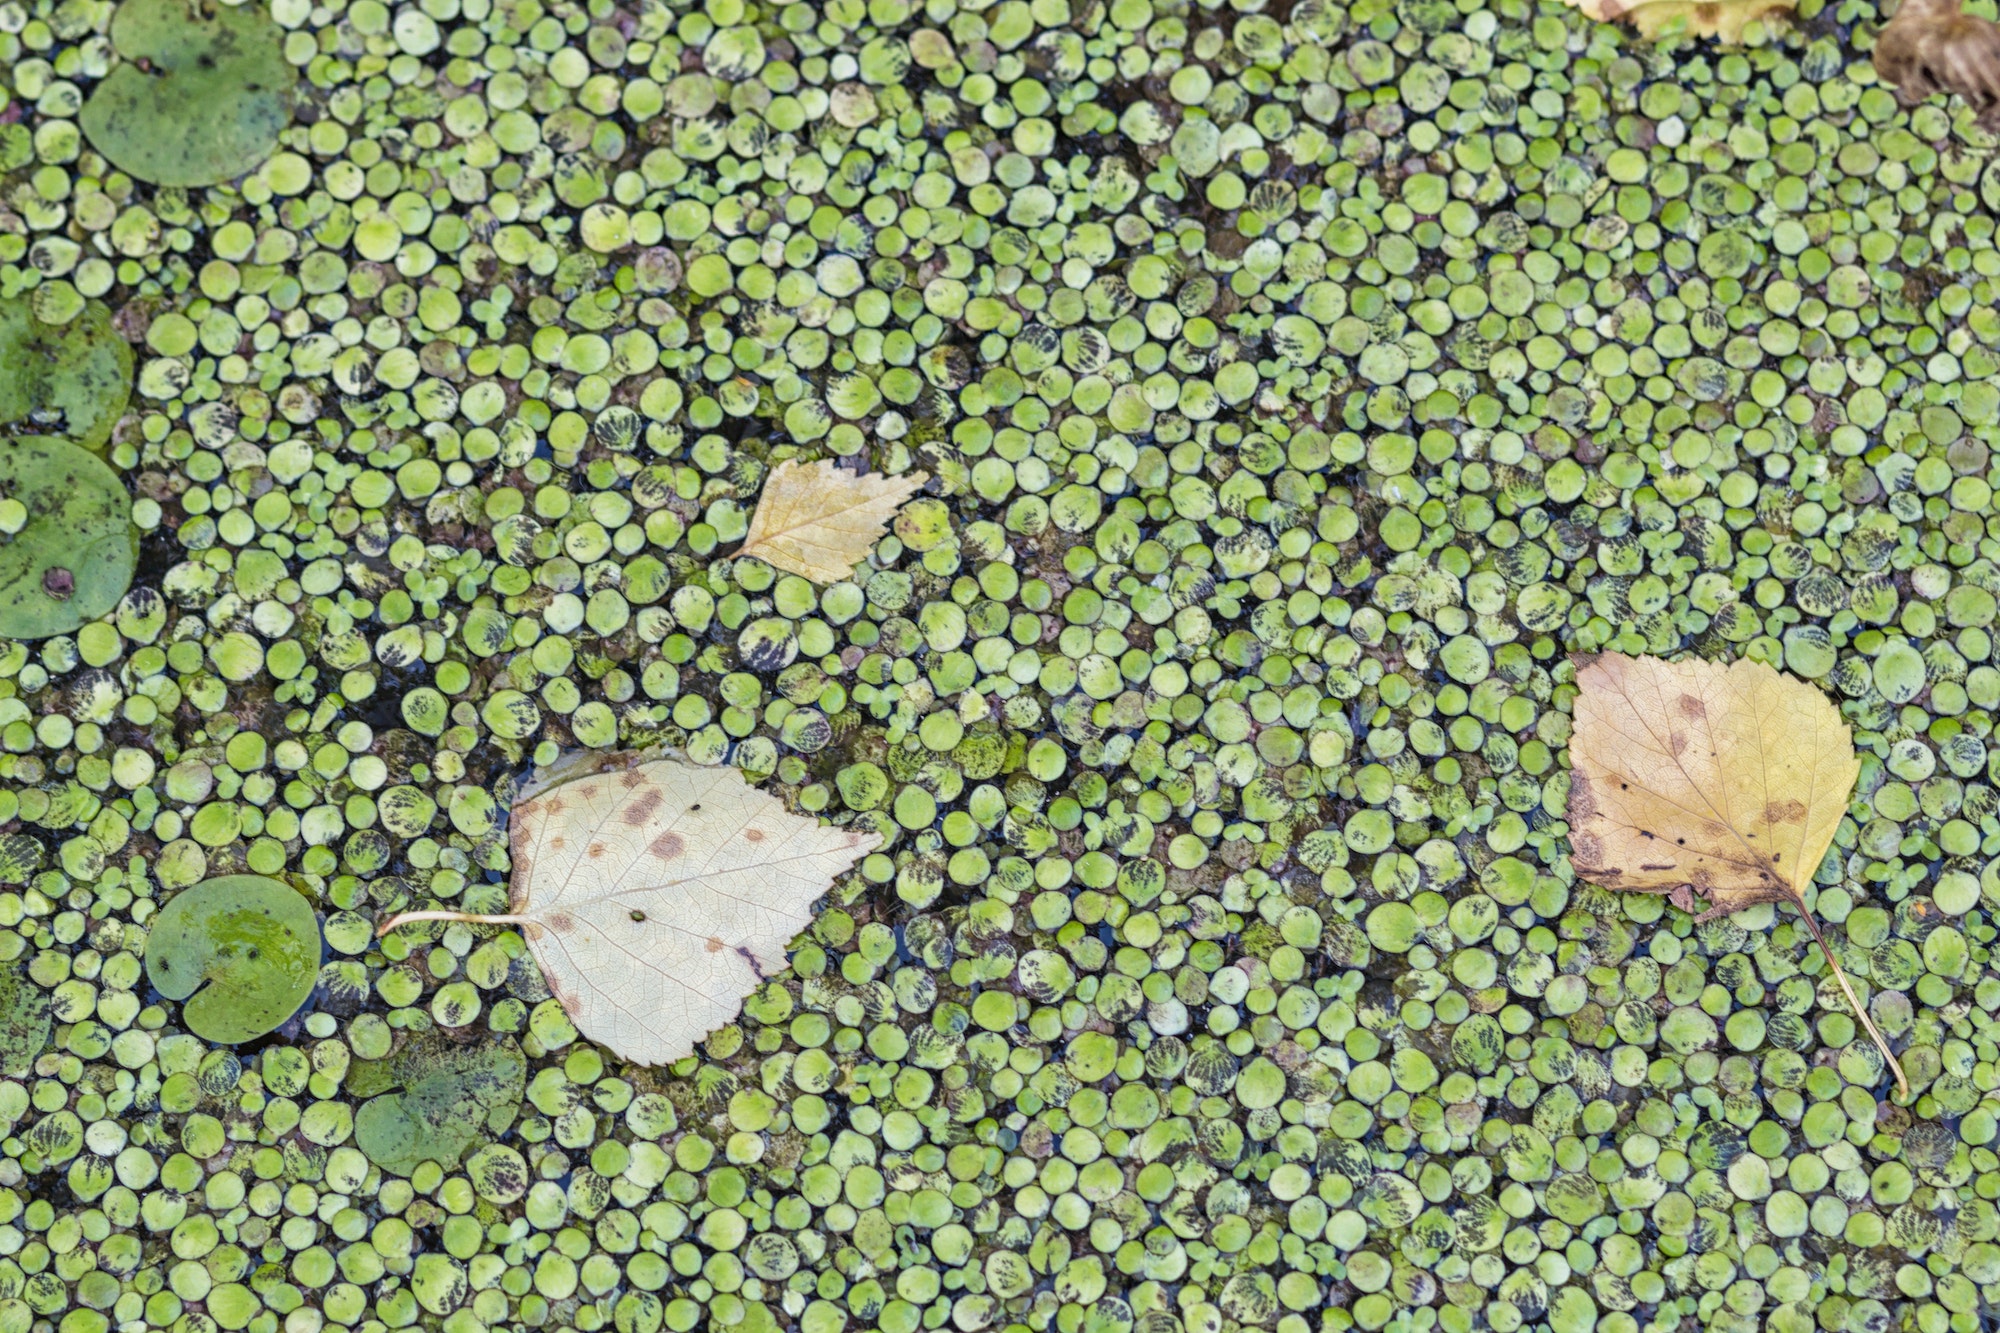 duckweed on the surface of the water